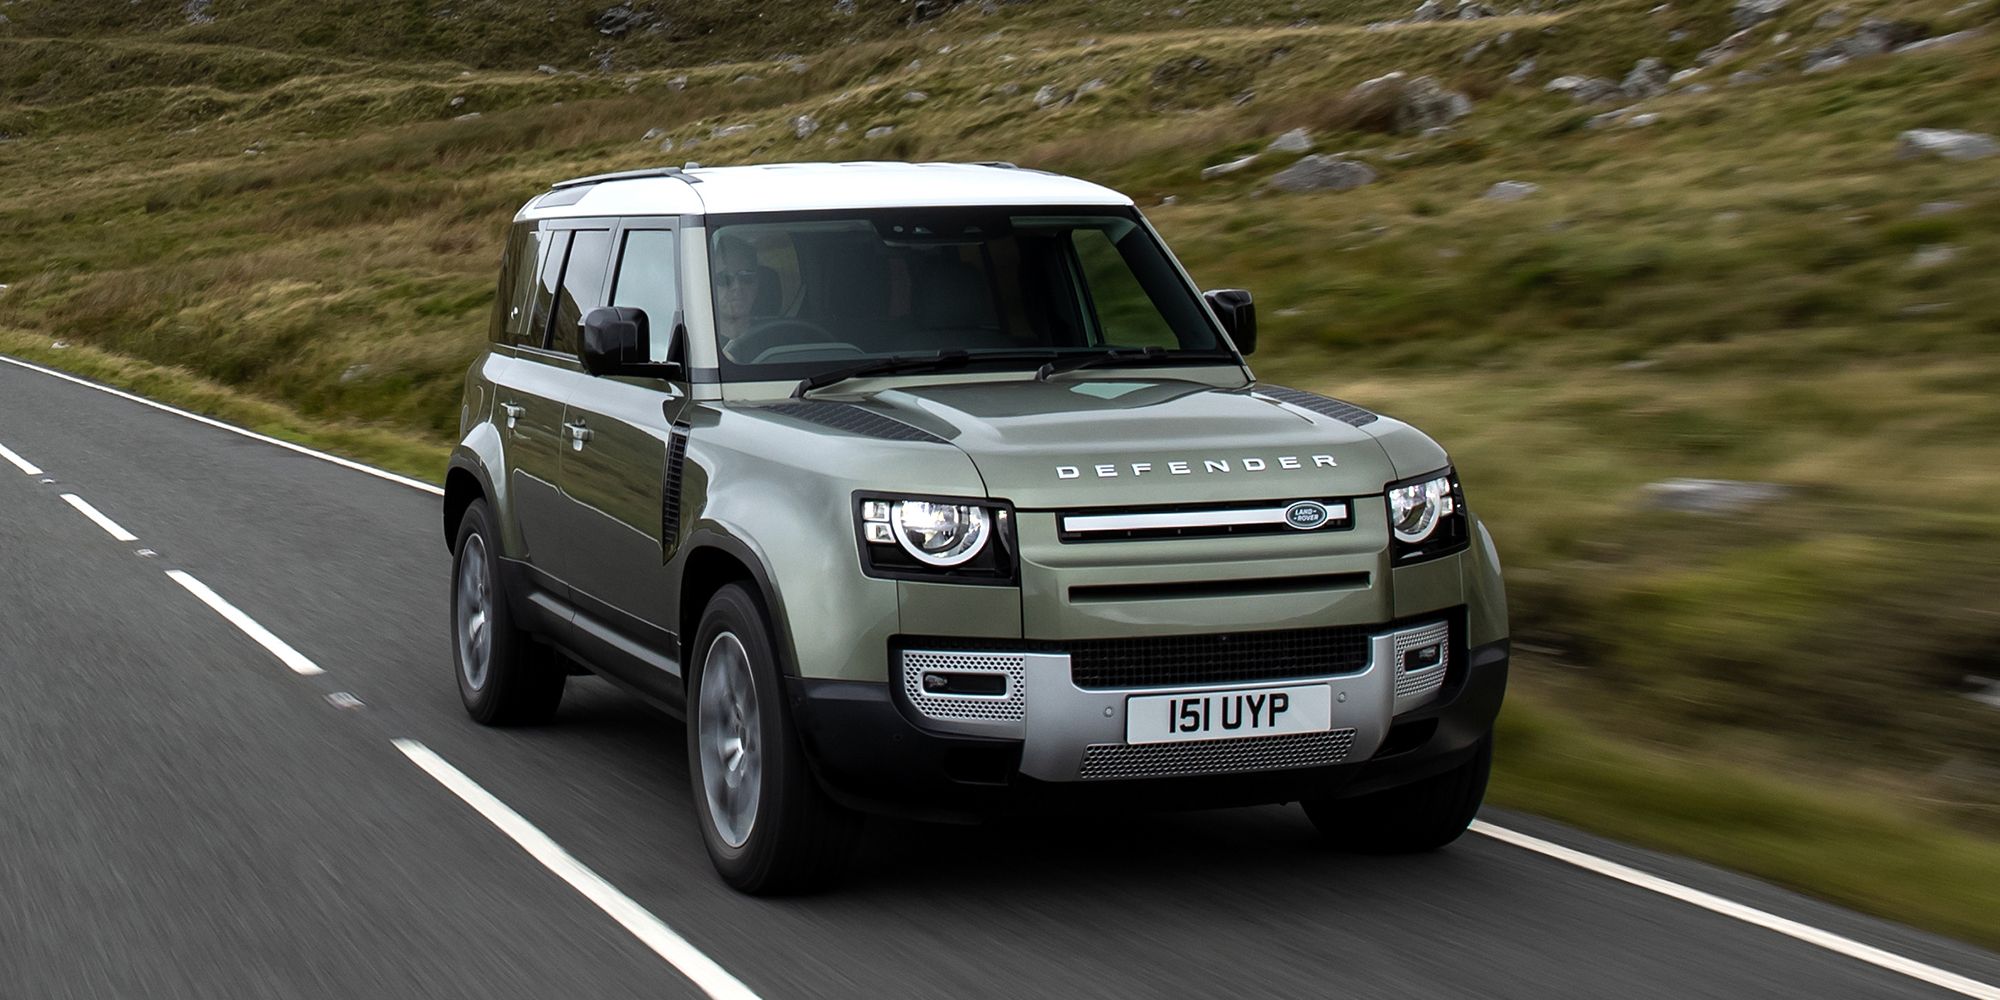 The front of the new Defender 110 on the move